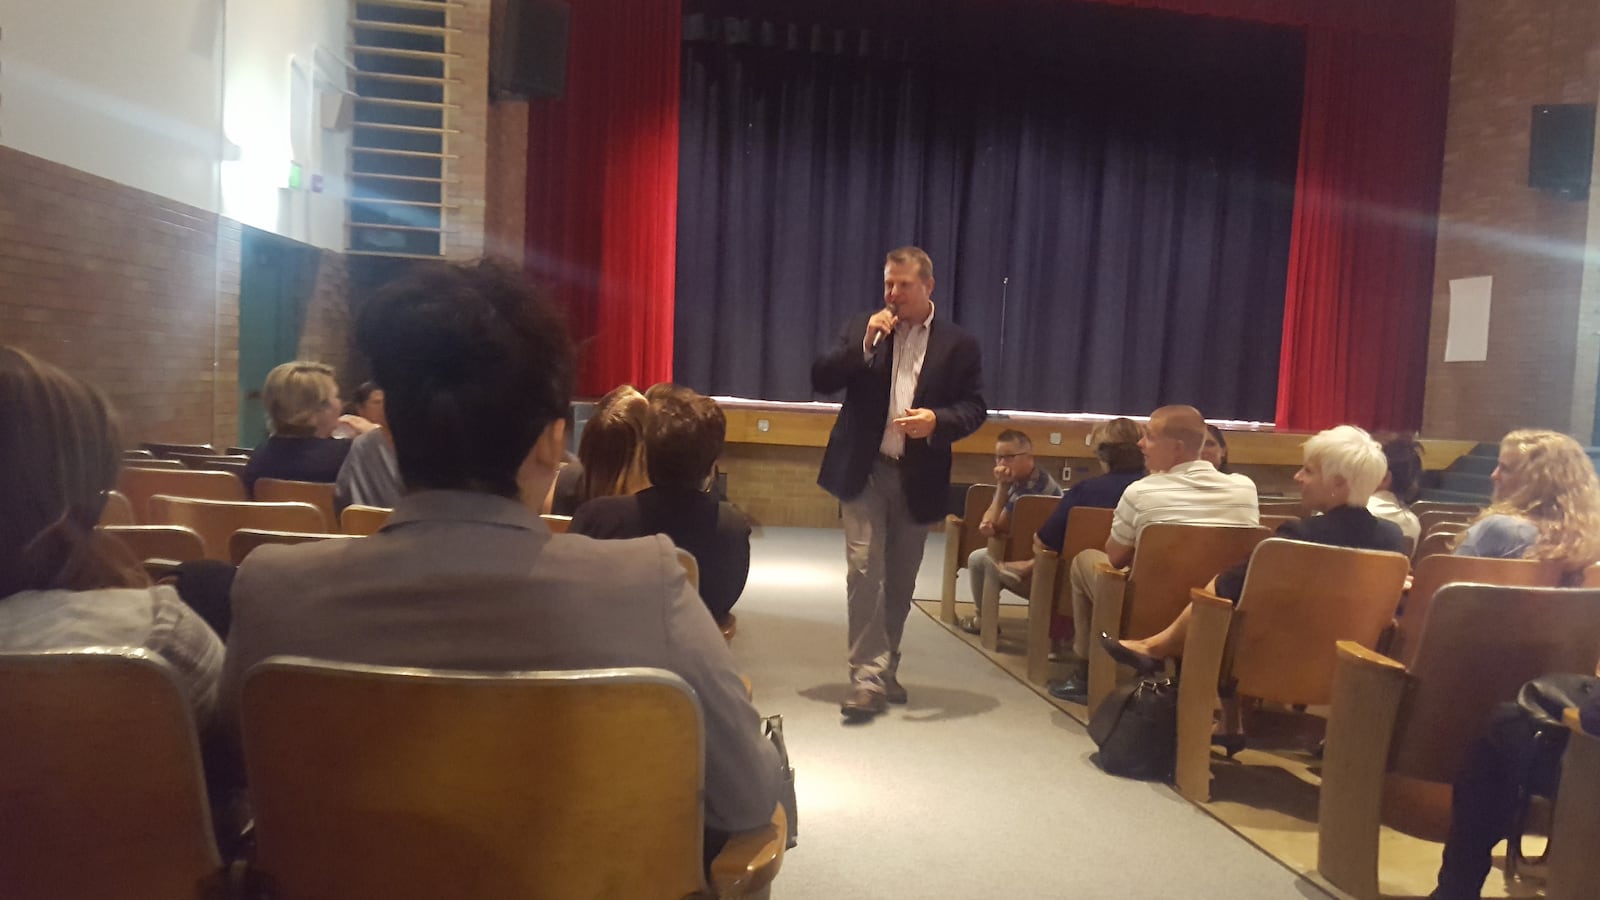 Jeffco Superintendent Jason Glass talks to community members at Arvada K-8 during a Many Voices event. (Photo by Yesenia Robles, Chalkbeat)